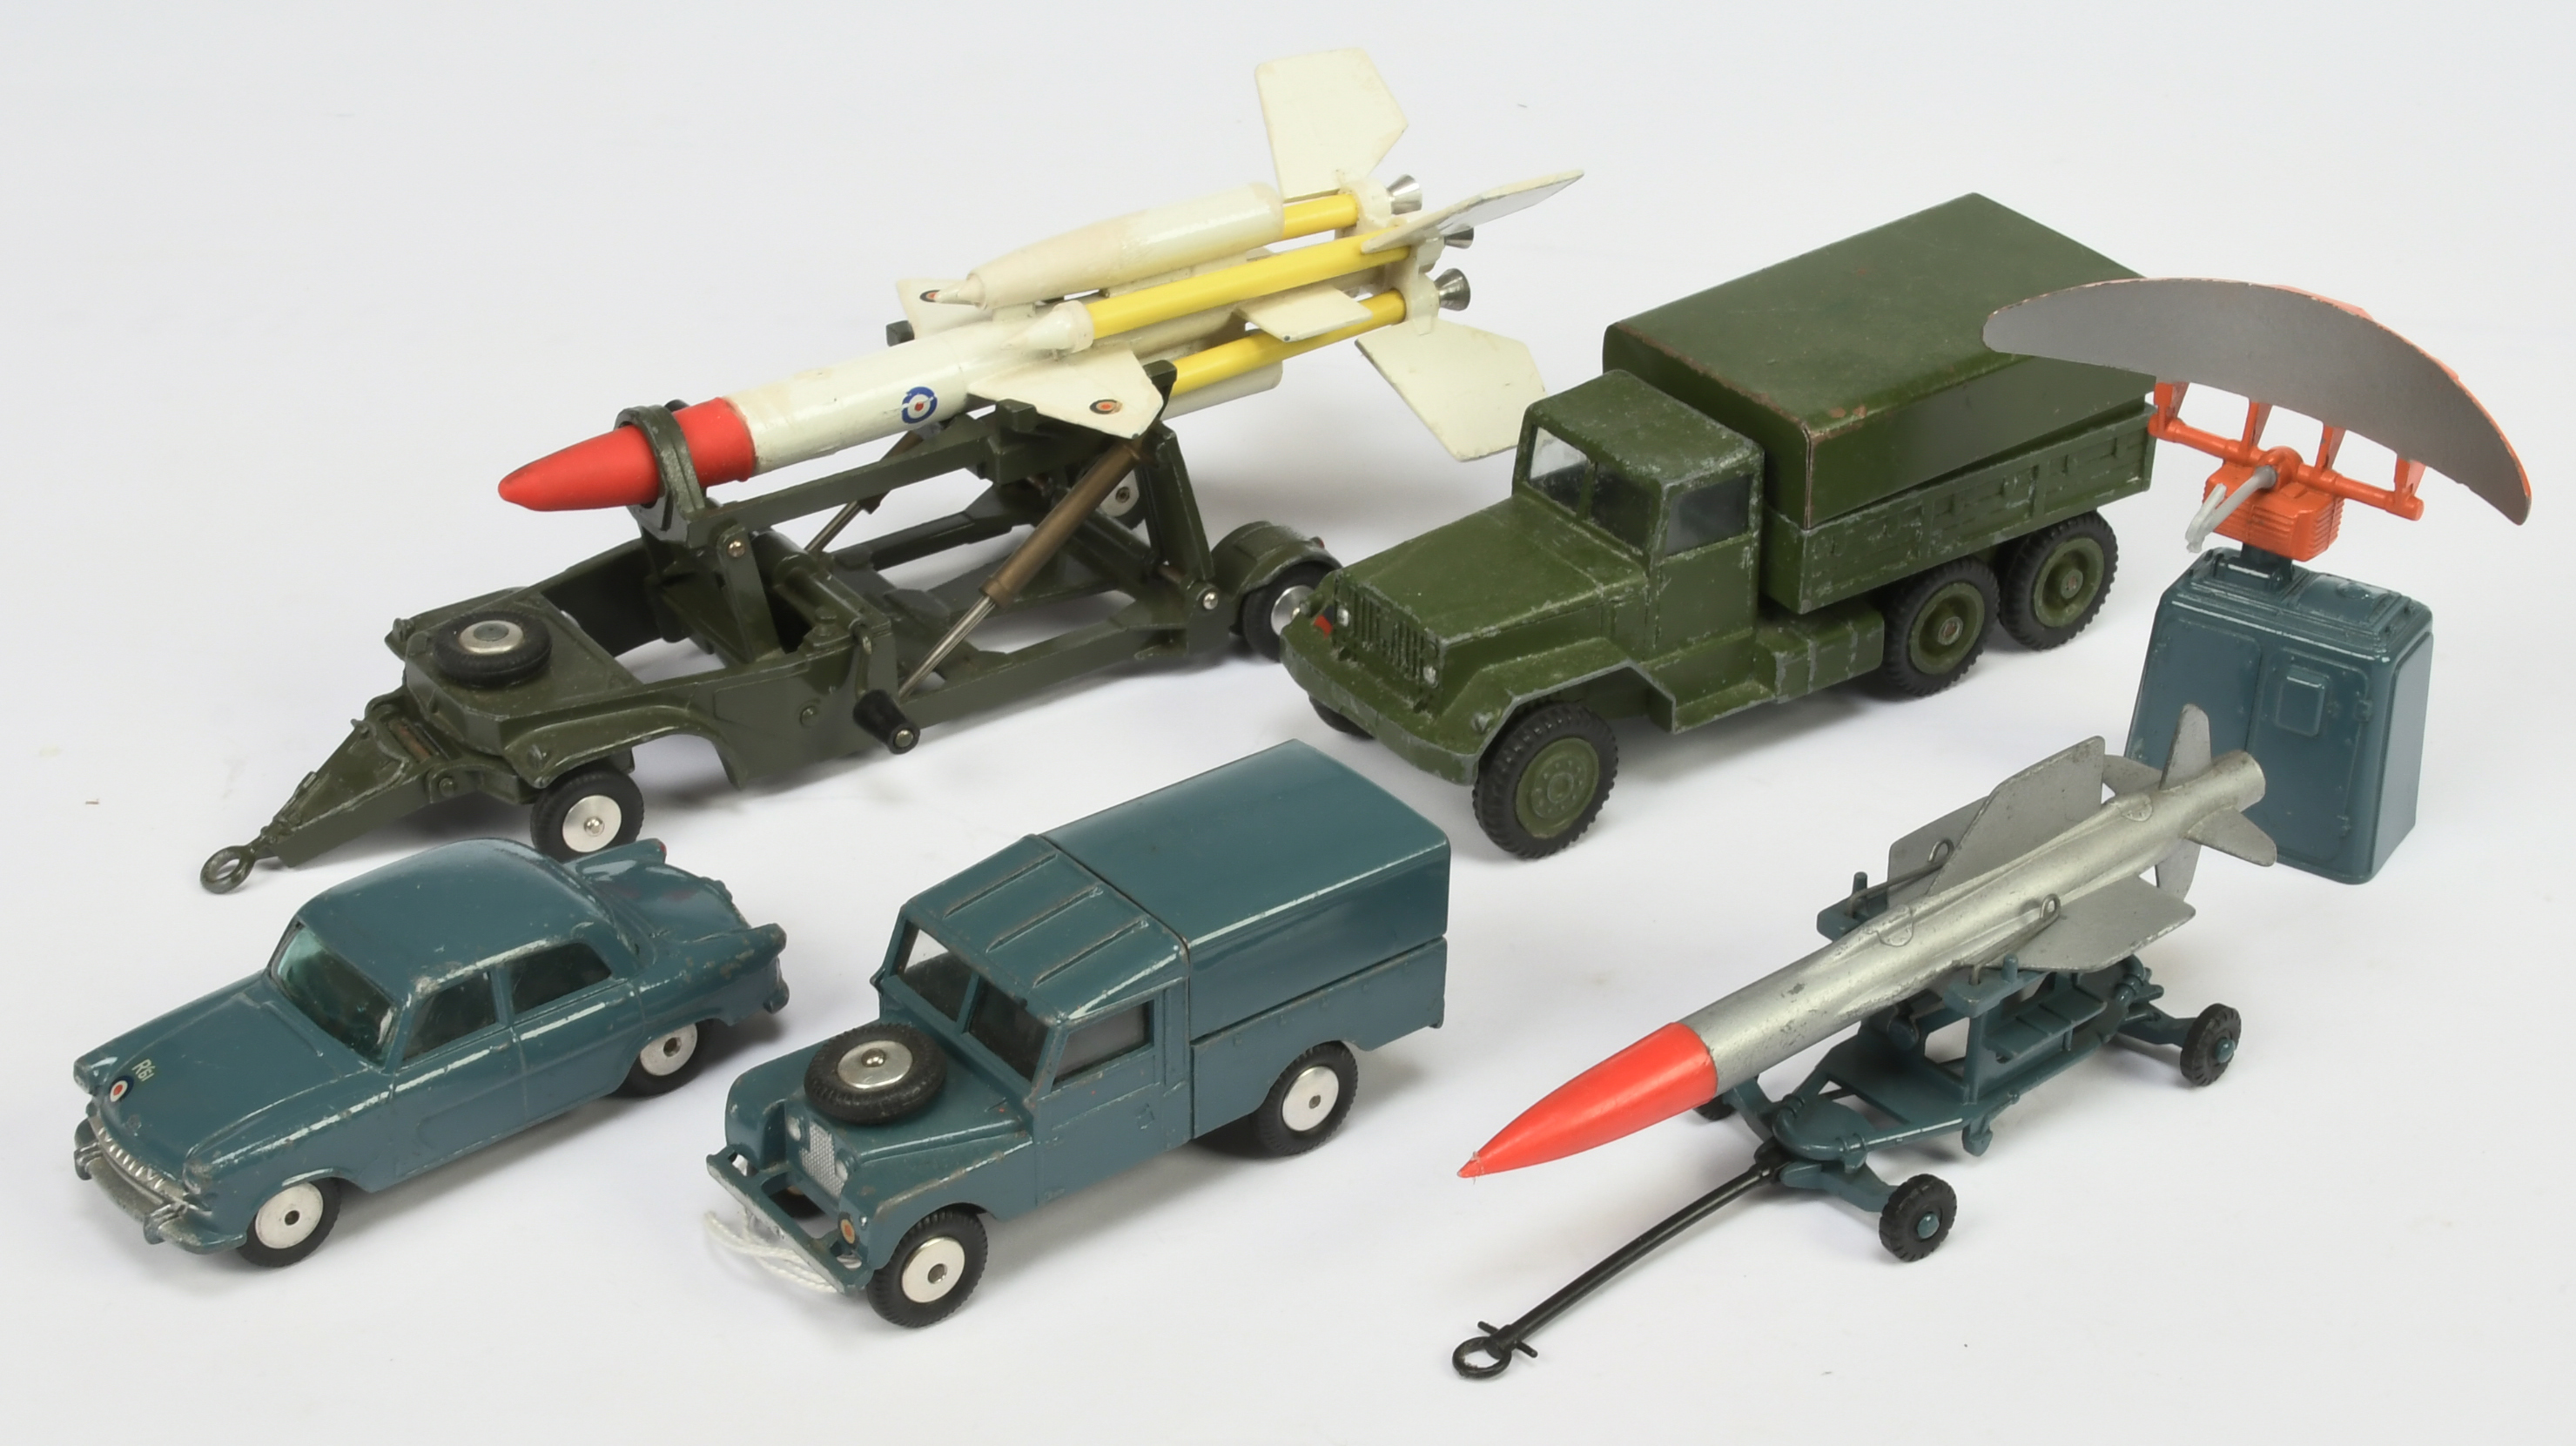 Corgi Toys Unboxed  Group Of Military To Include  -, "RAF" Land Rover With Thunderbird Missile On...